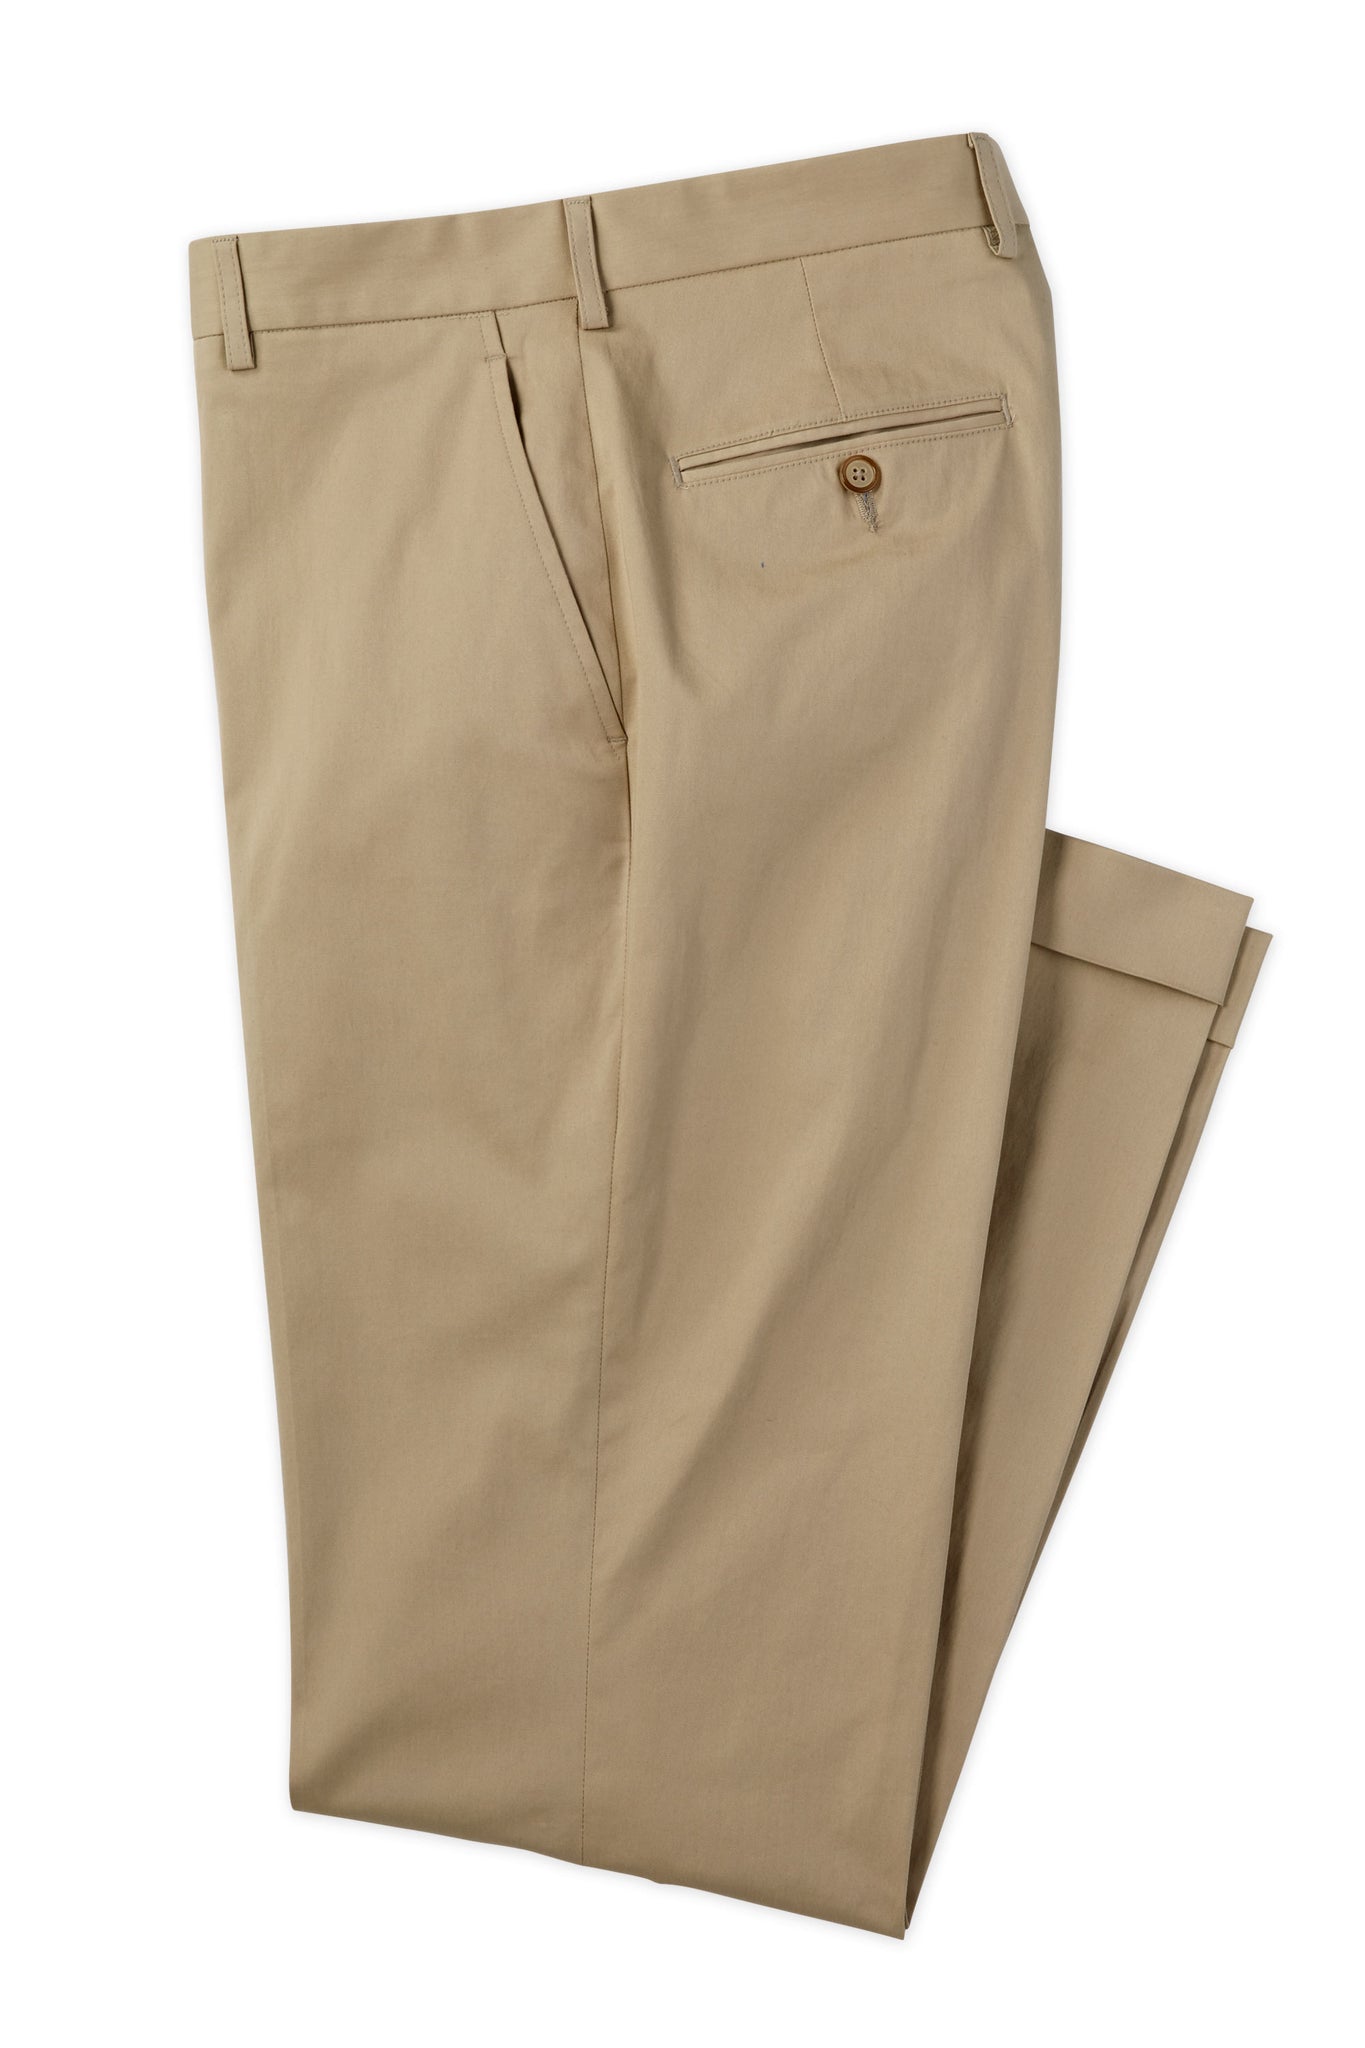 Milwaukee Men's 36 in. x 34 in. Khaki and Gray Cotton/Polyester/Spandex  Flex Work Pants with 6-Pockets (2-Pack) 701K-3634-701G-3634 - The Home Depot